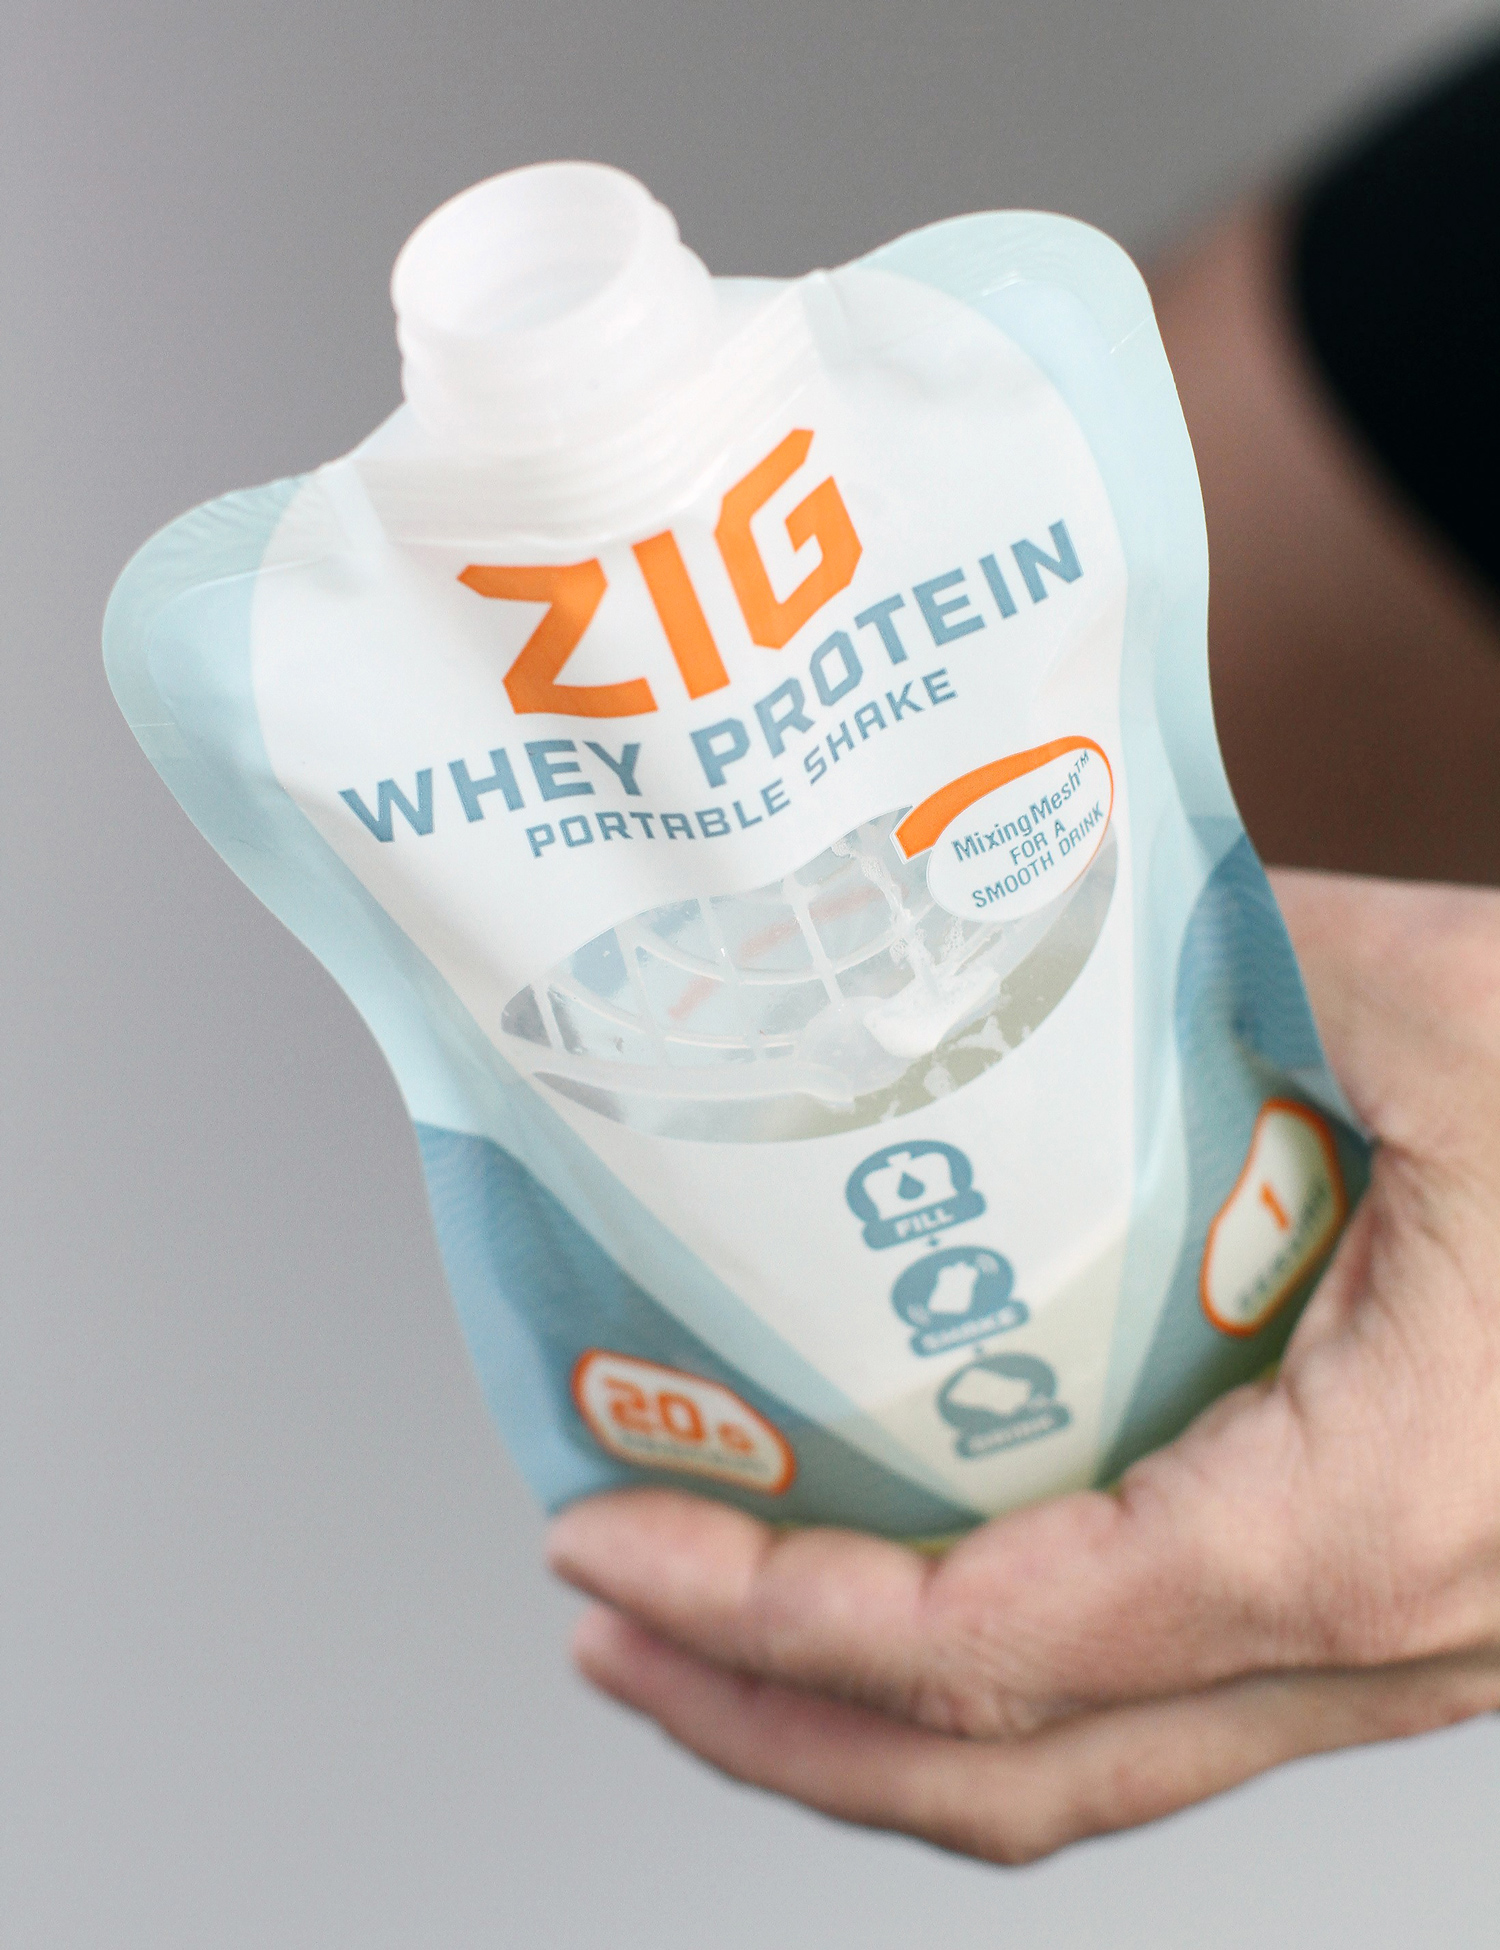 ZIG is a just-add-water portable protein shake.